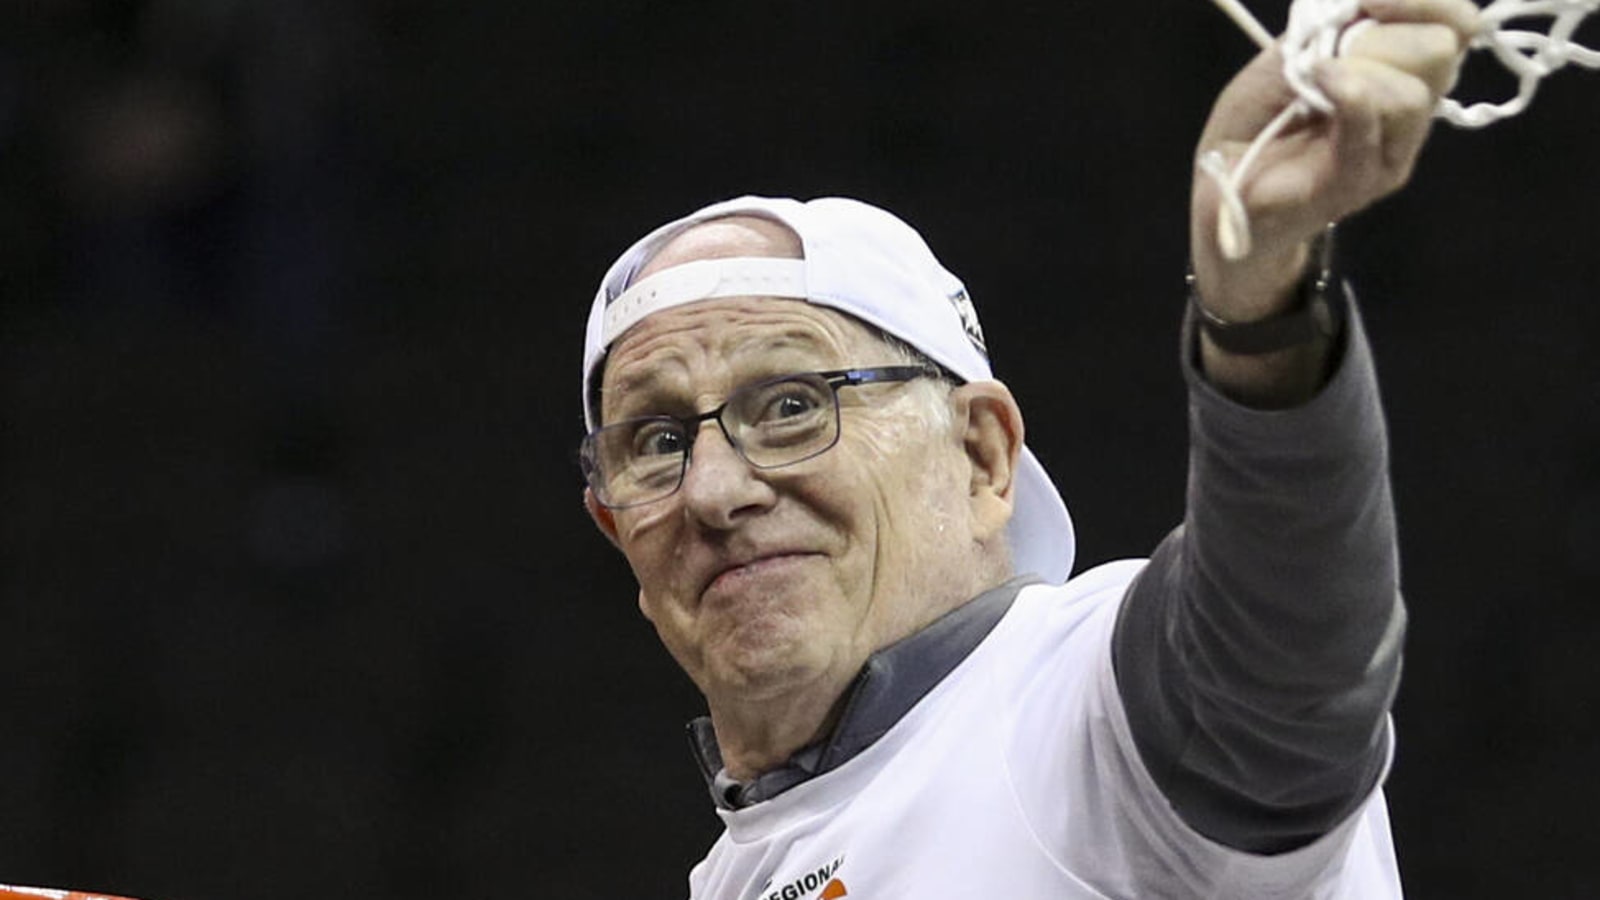 Miami's Larranaga joins exclusive club with Final Four appearance